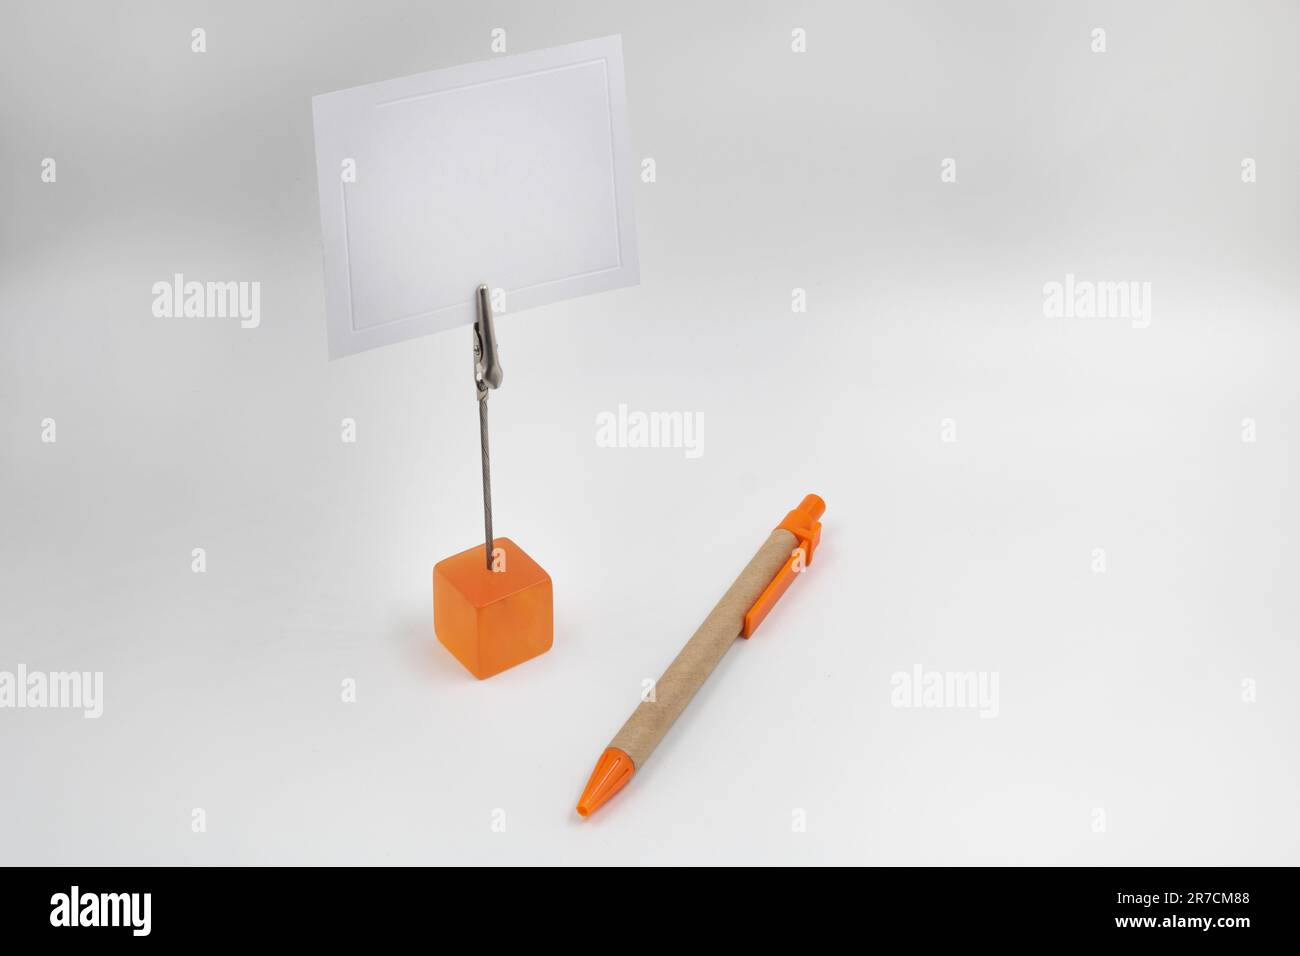 A small orange paper-holder sitting next to an orange and brown pen, with copy space Stock Photo